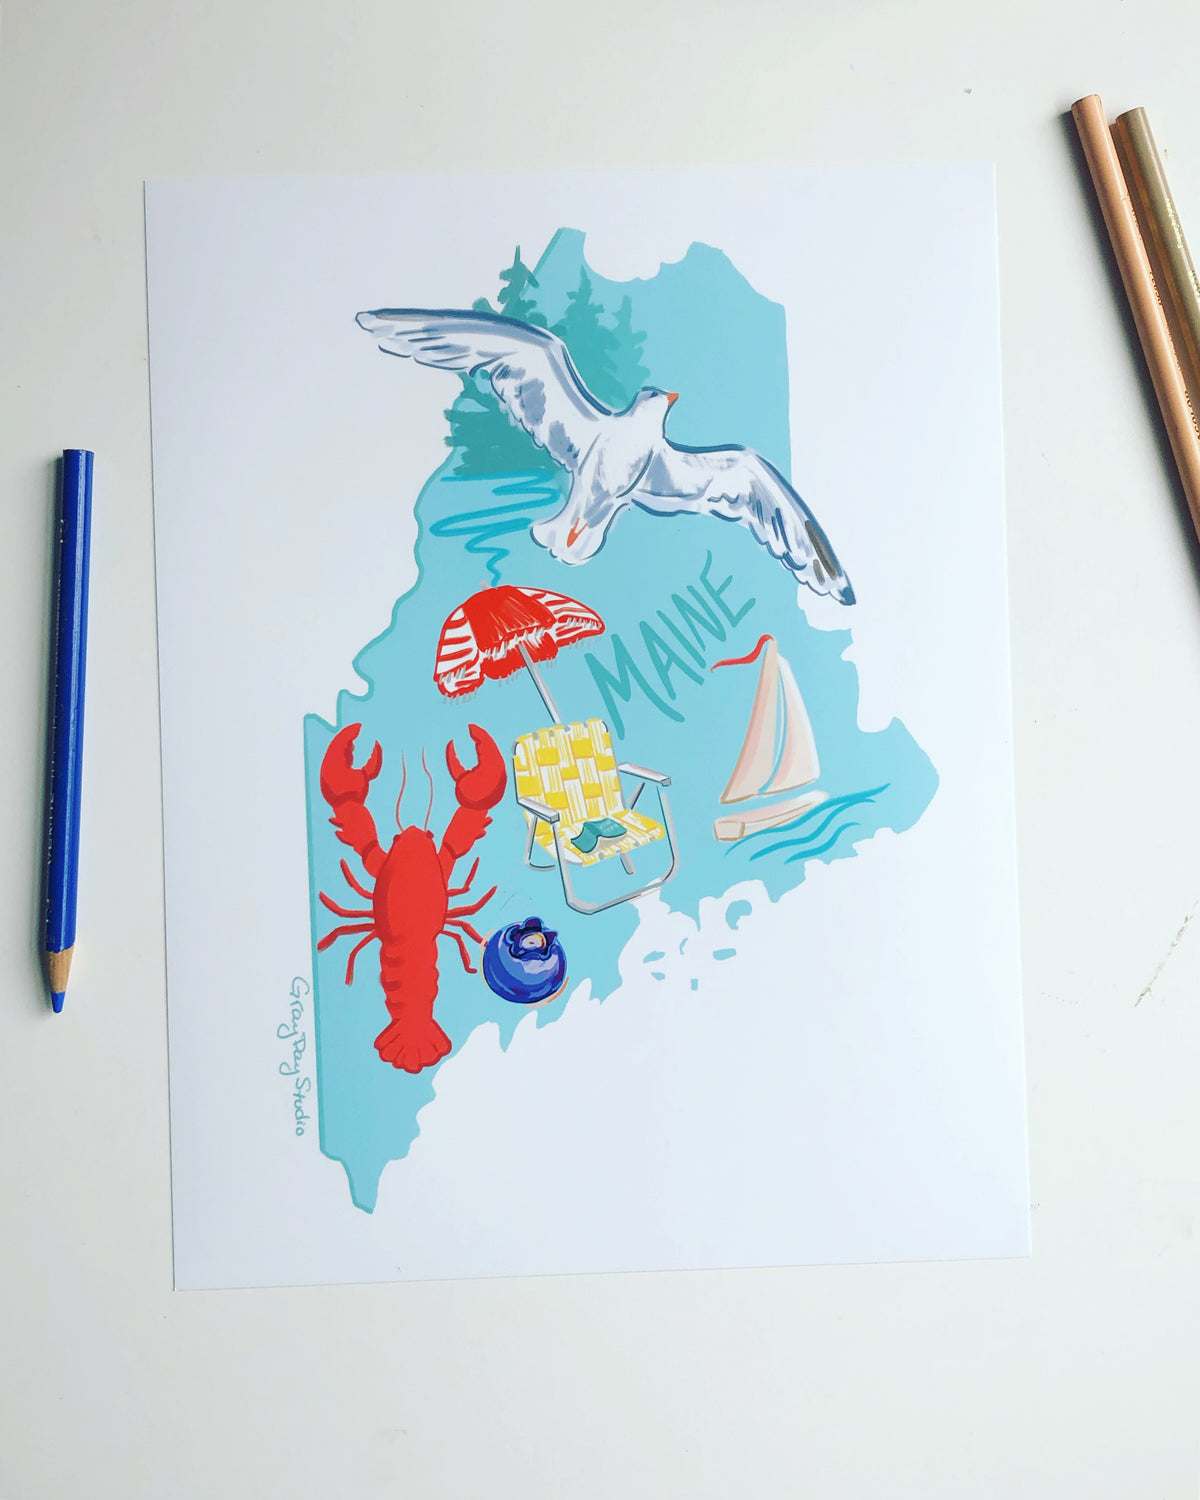 State of Maine artowrk featuring a seagull, sailboat, lobster, blueberry, beach chair and umbrella.